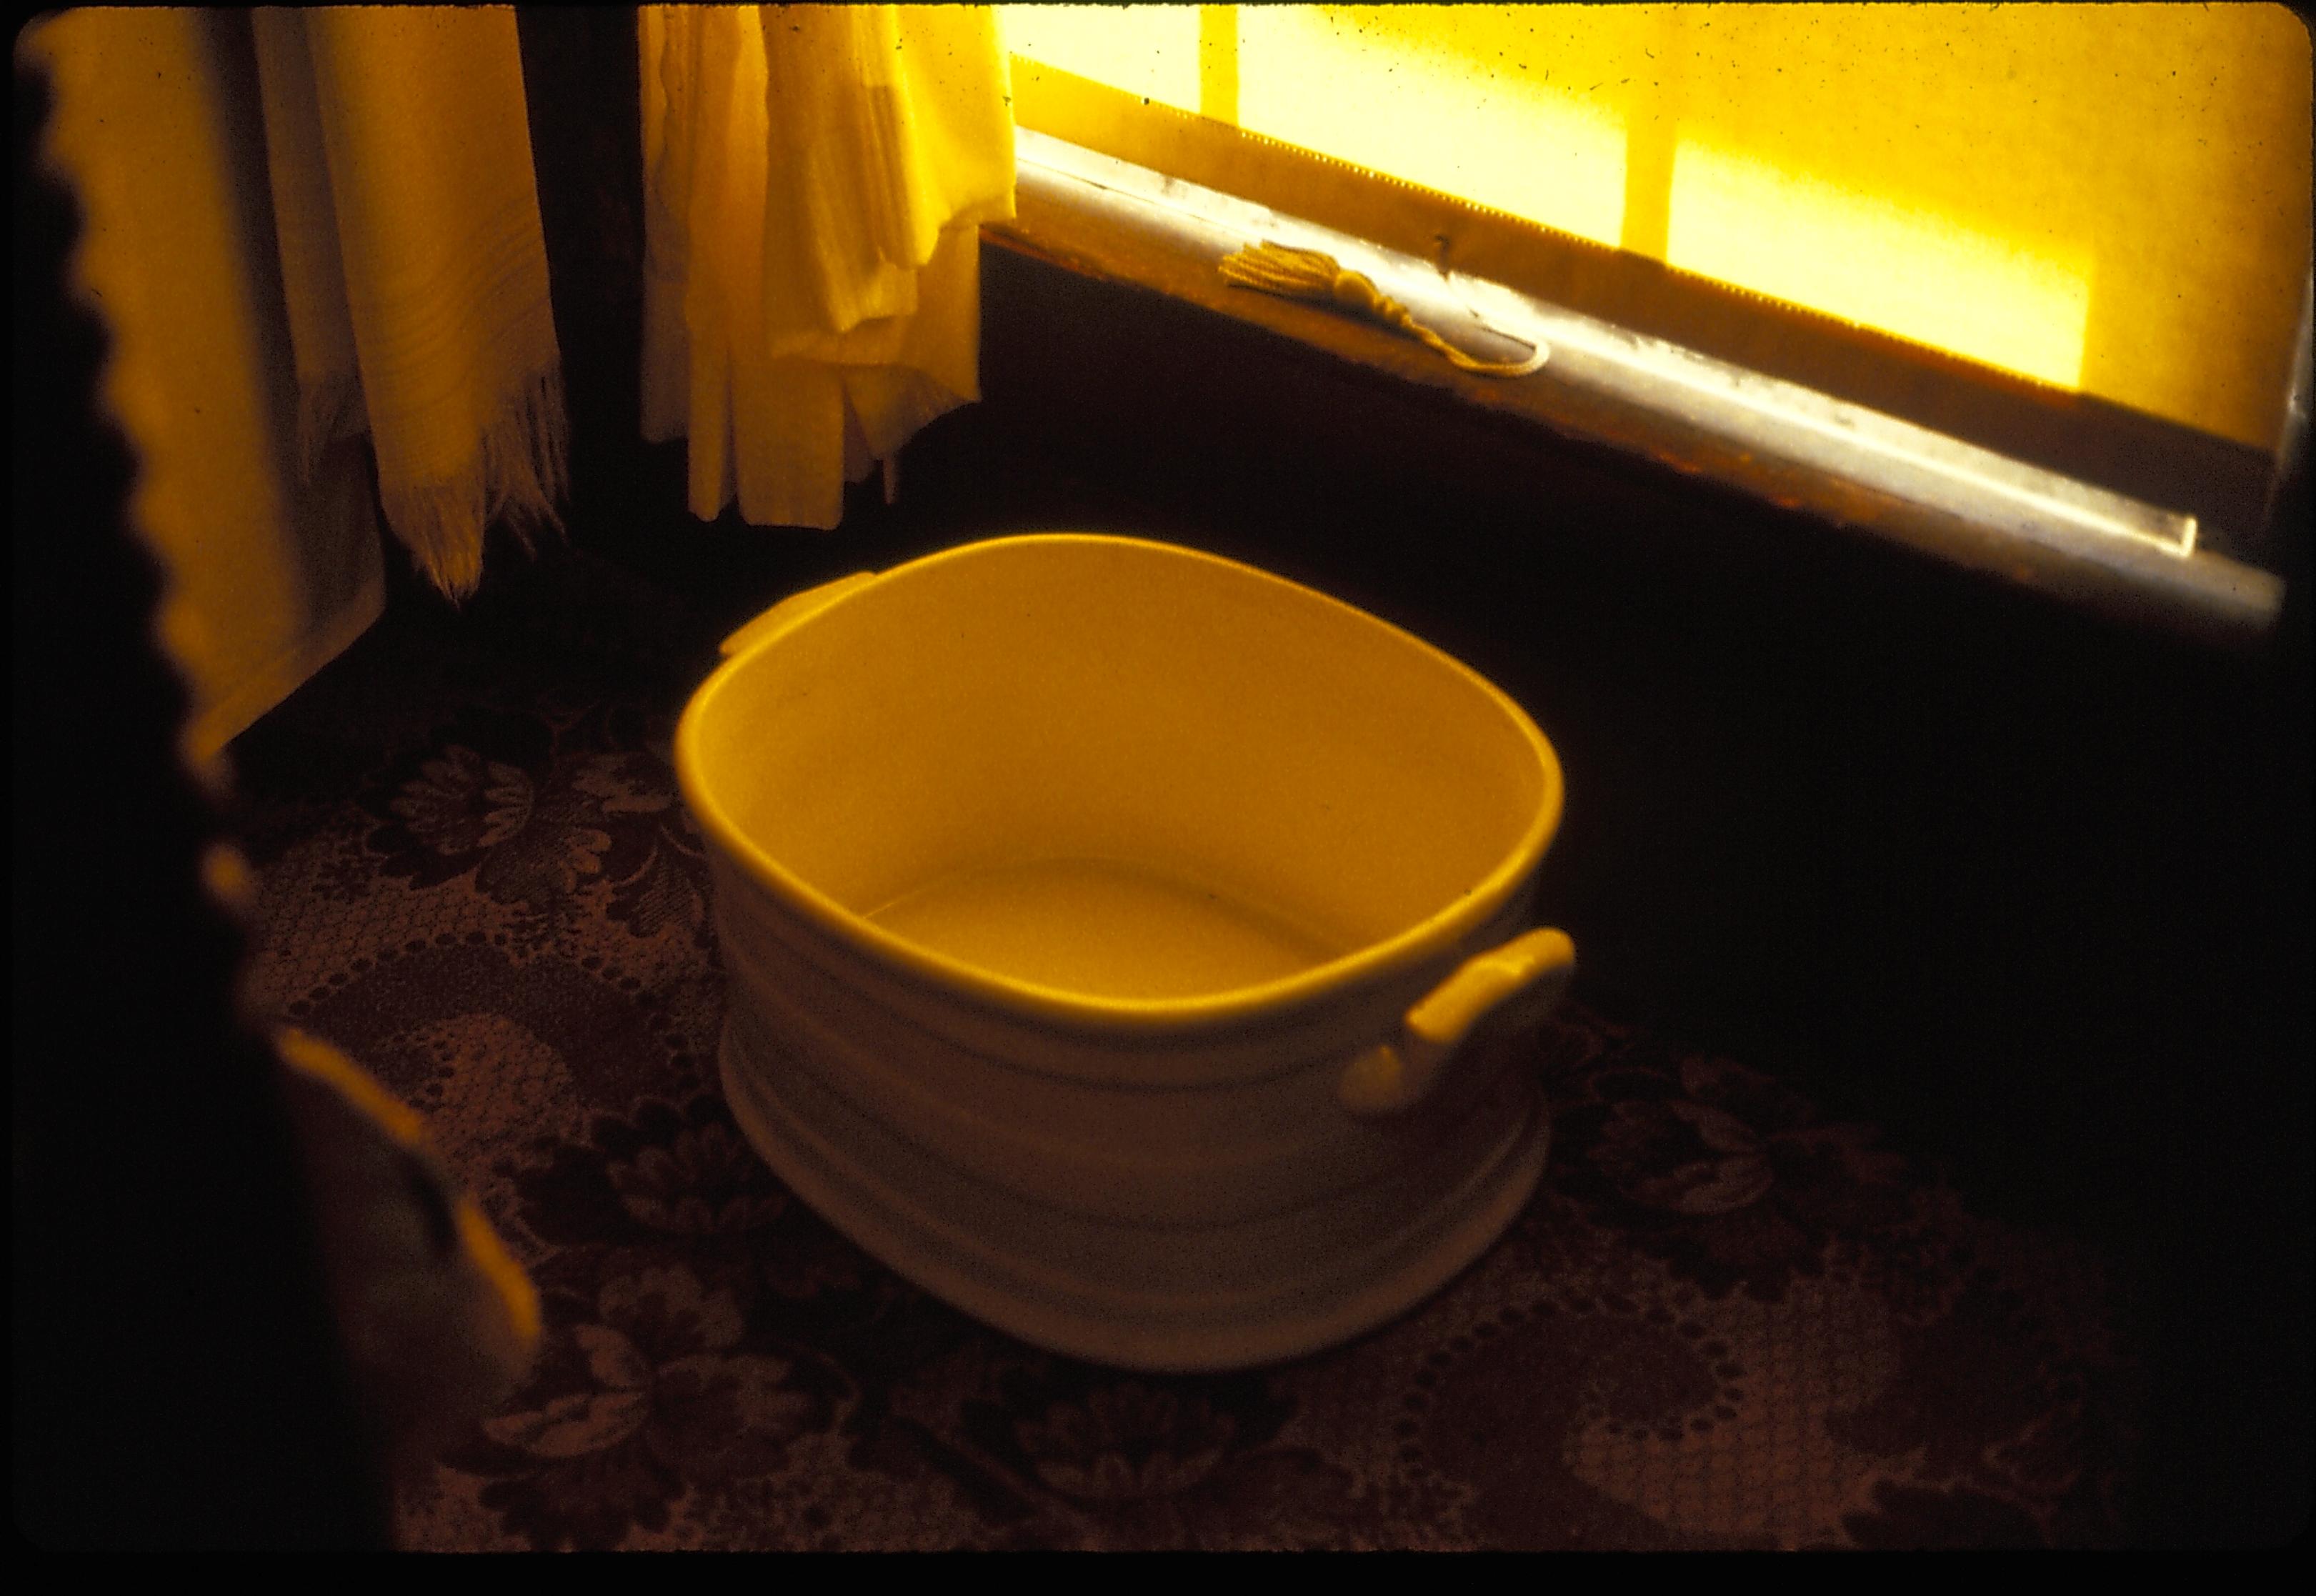 NA 3F.6 Lincoln, Home, Boy's, Guest, Room, bedpan